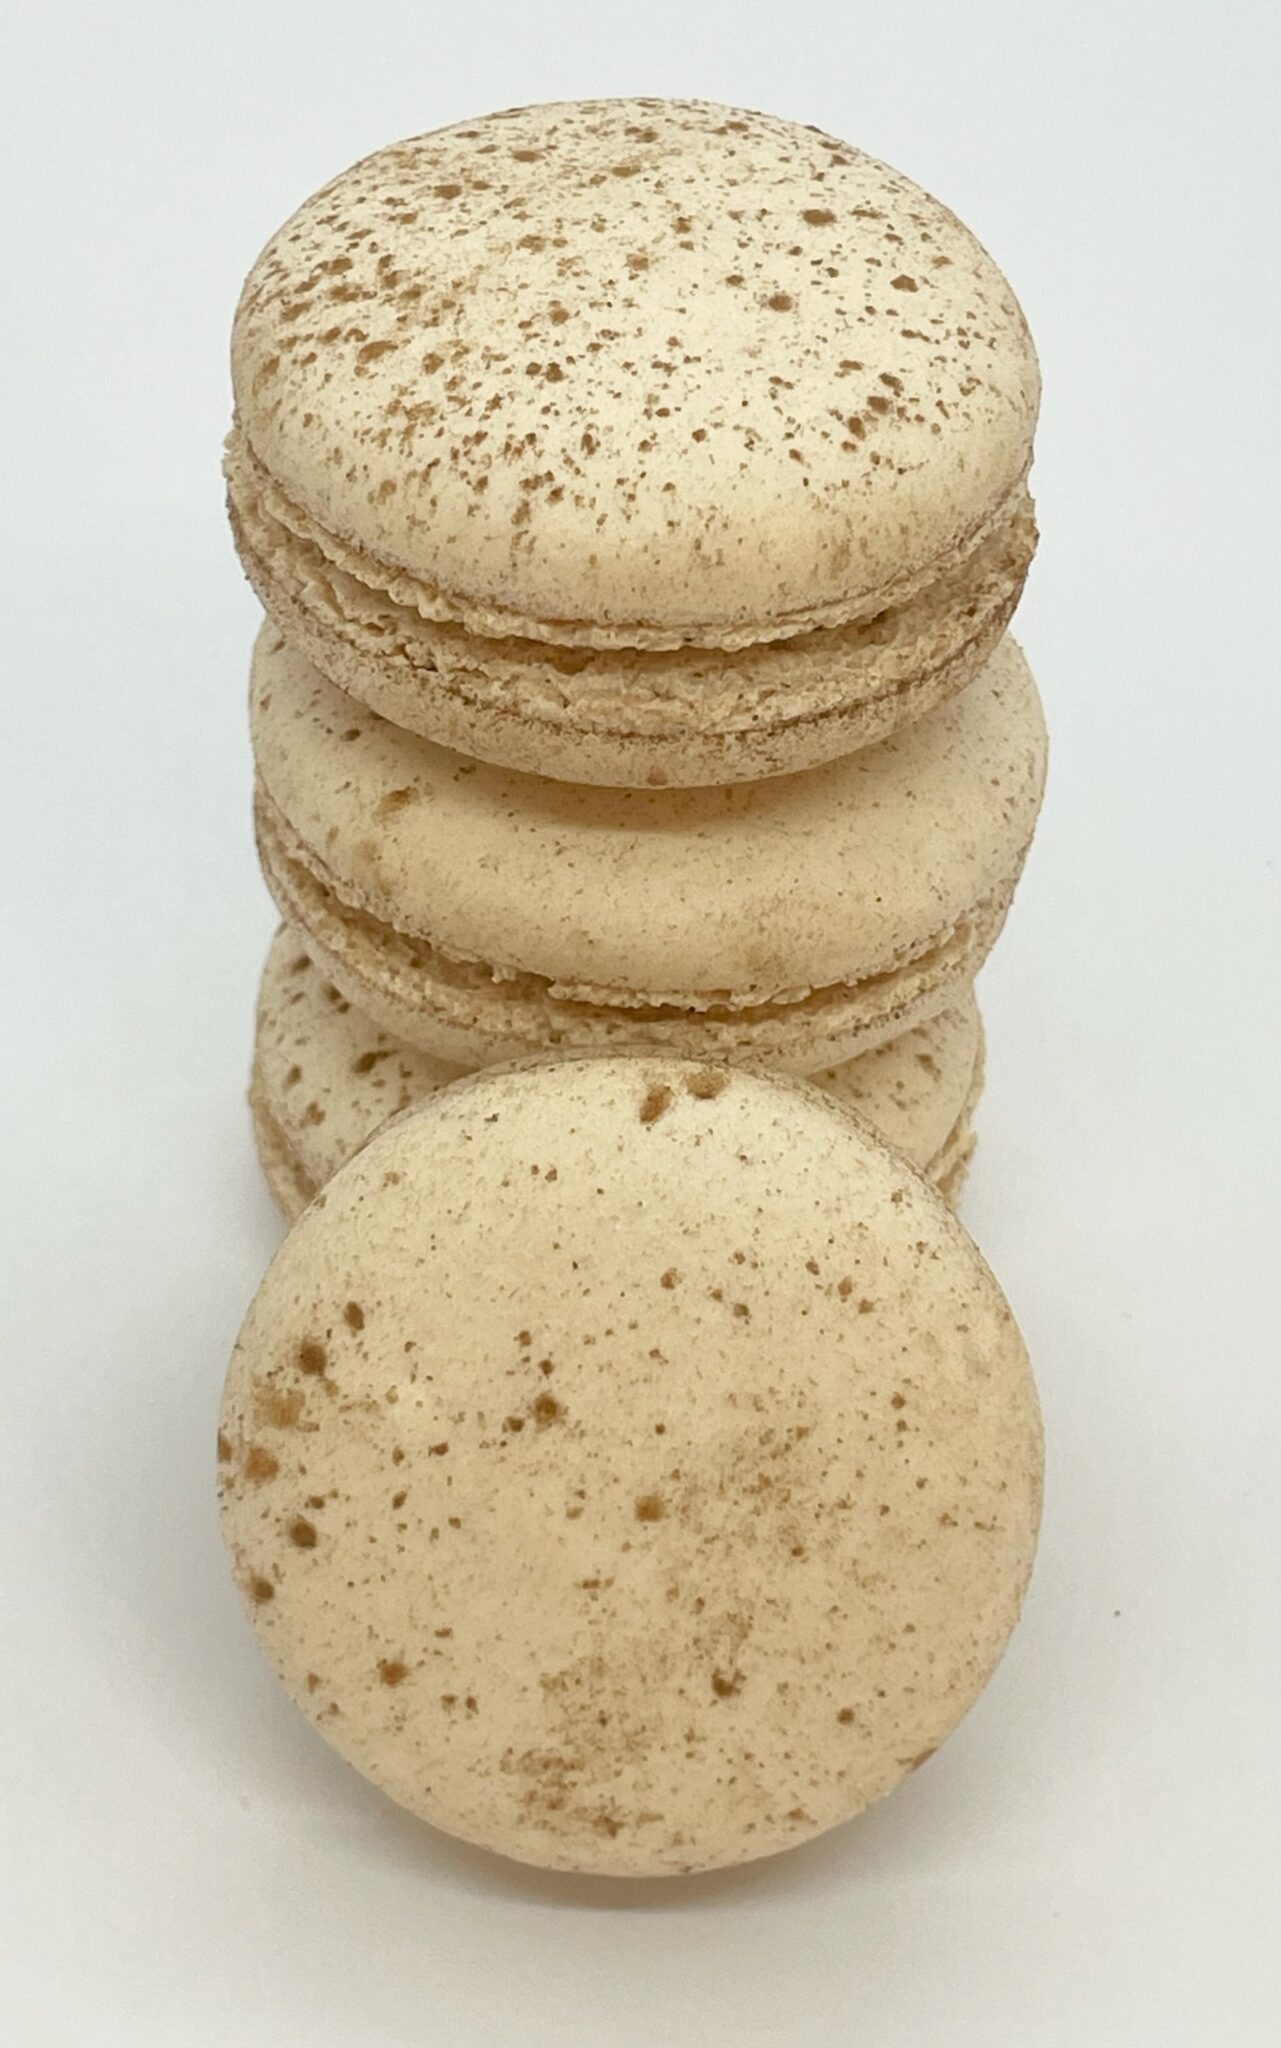 French Macarons - Honey B's Macarons - Always Bee Delicious